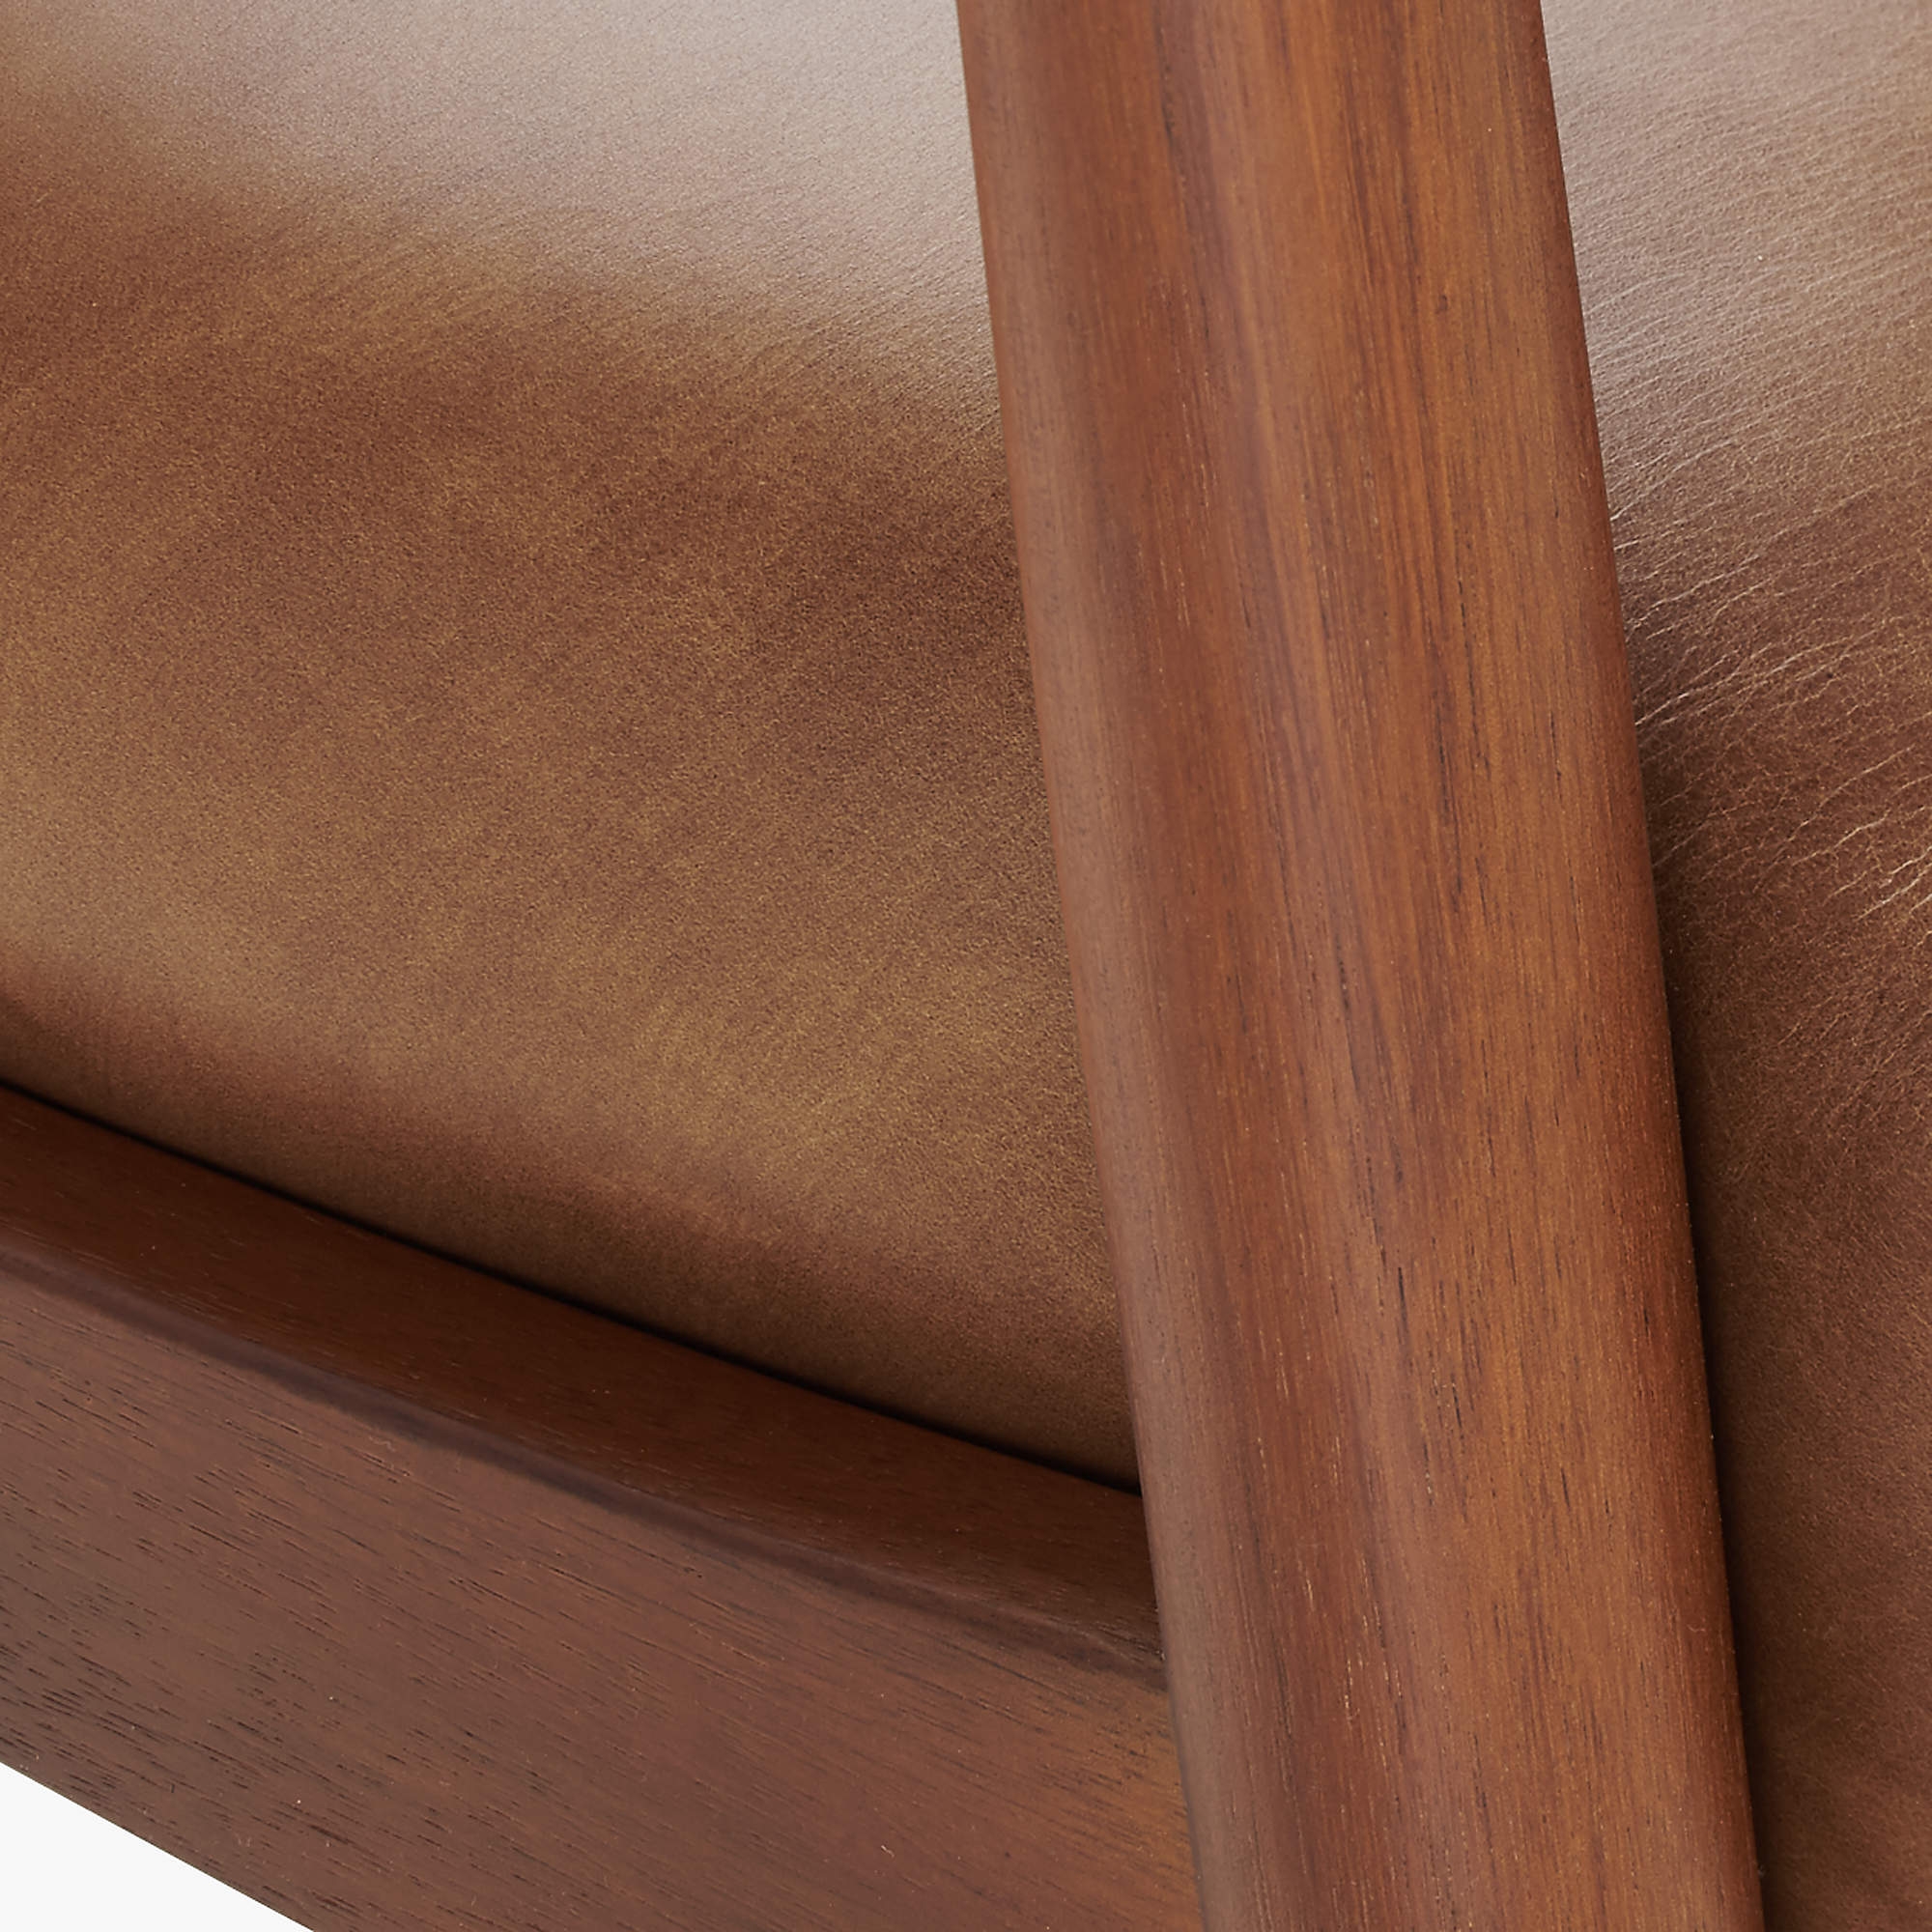 Troubadour Saddle Leather Wood Frame Chair, Kasen Brown RESTOCK Late June 2022 - Image 6